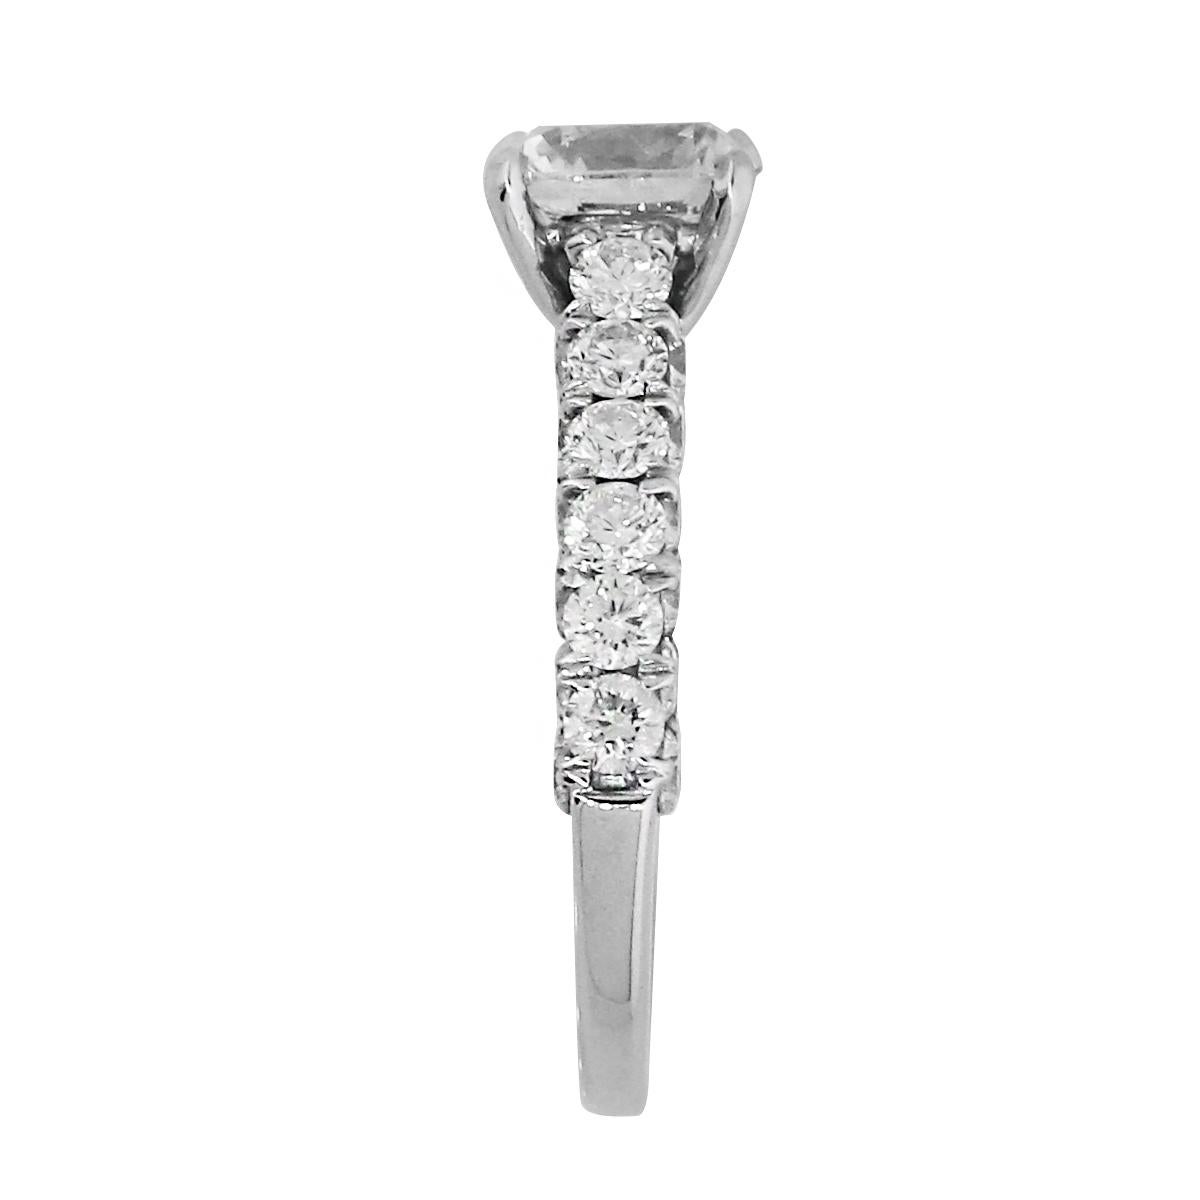 Material: 18k White Gold
Center Diamond Details: 1.51ct GIA Certified cushion cut diamond. Center diamond is I in color and VS2 in clarity. 
Accent Diamond Details: Approximately 1.70ctw round brilliant accent diamonds. Diamonds are G/H in color and